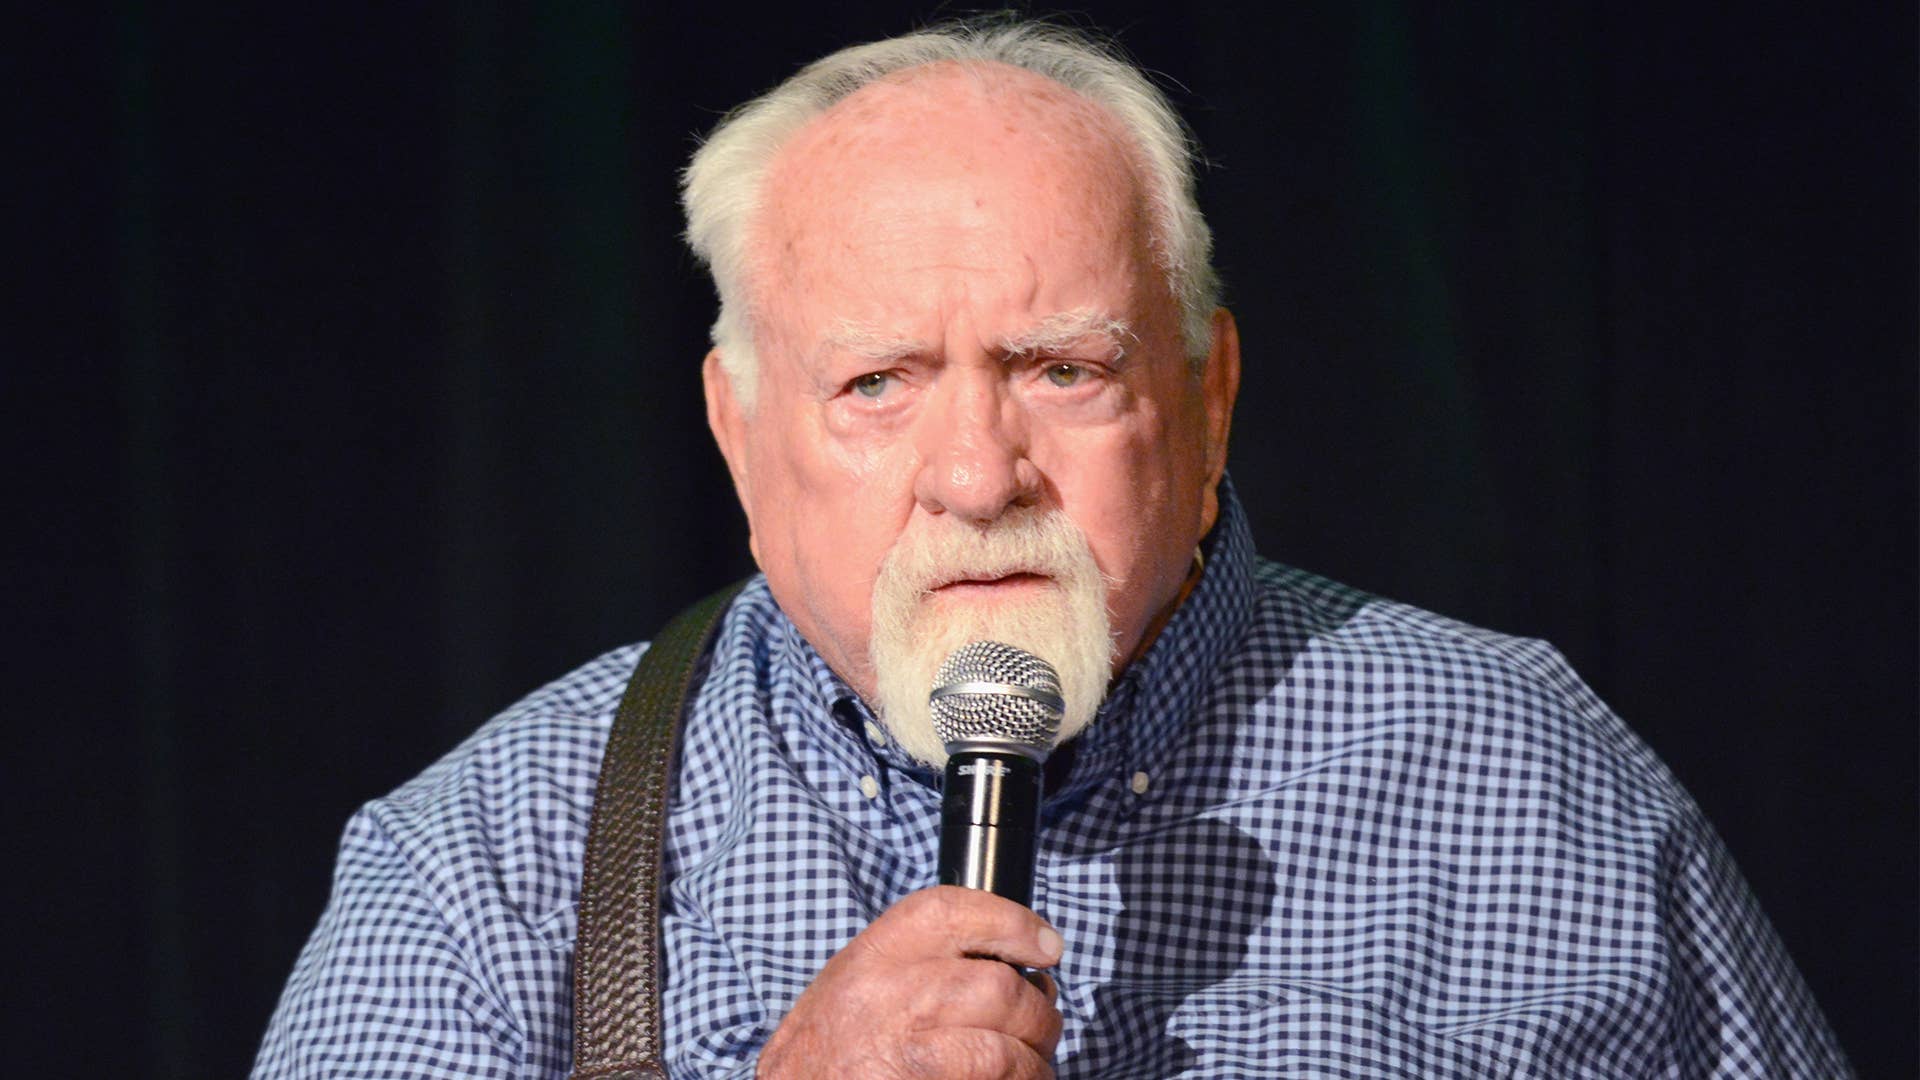 This is a photo of Wilford Brimley.